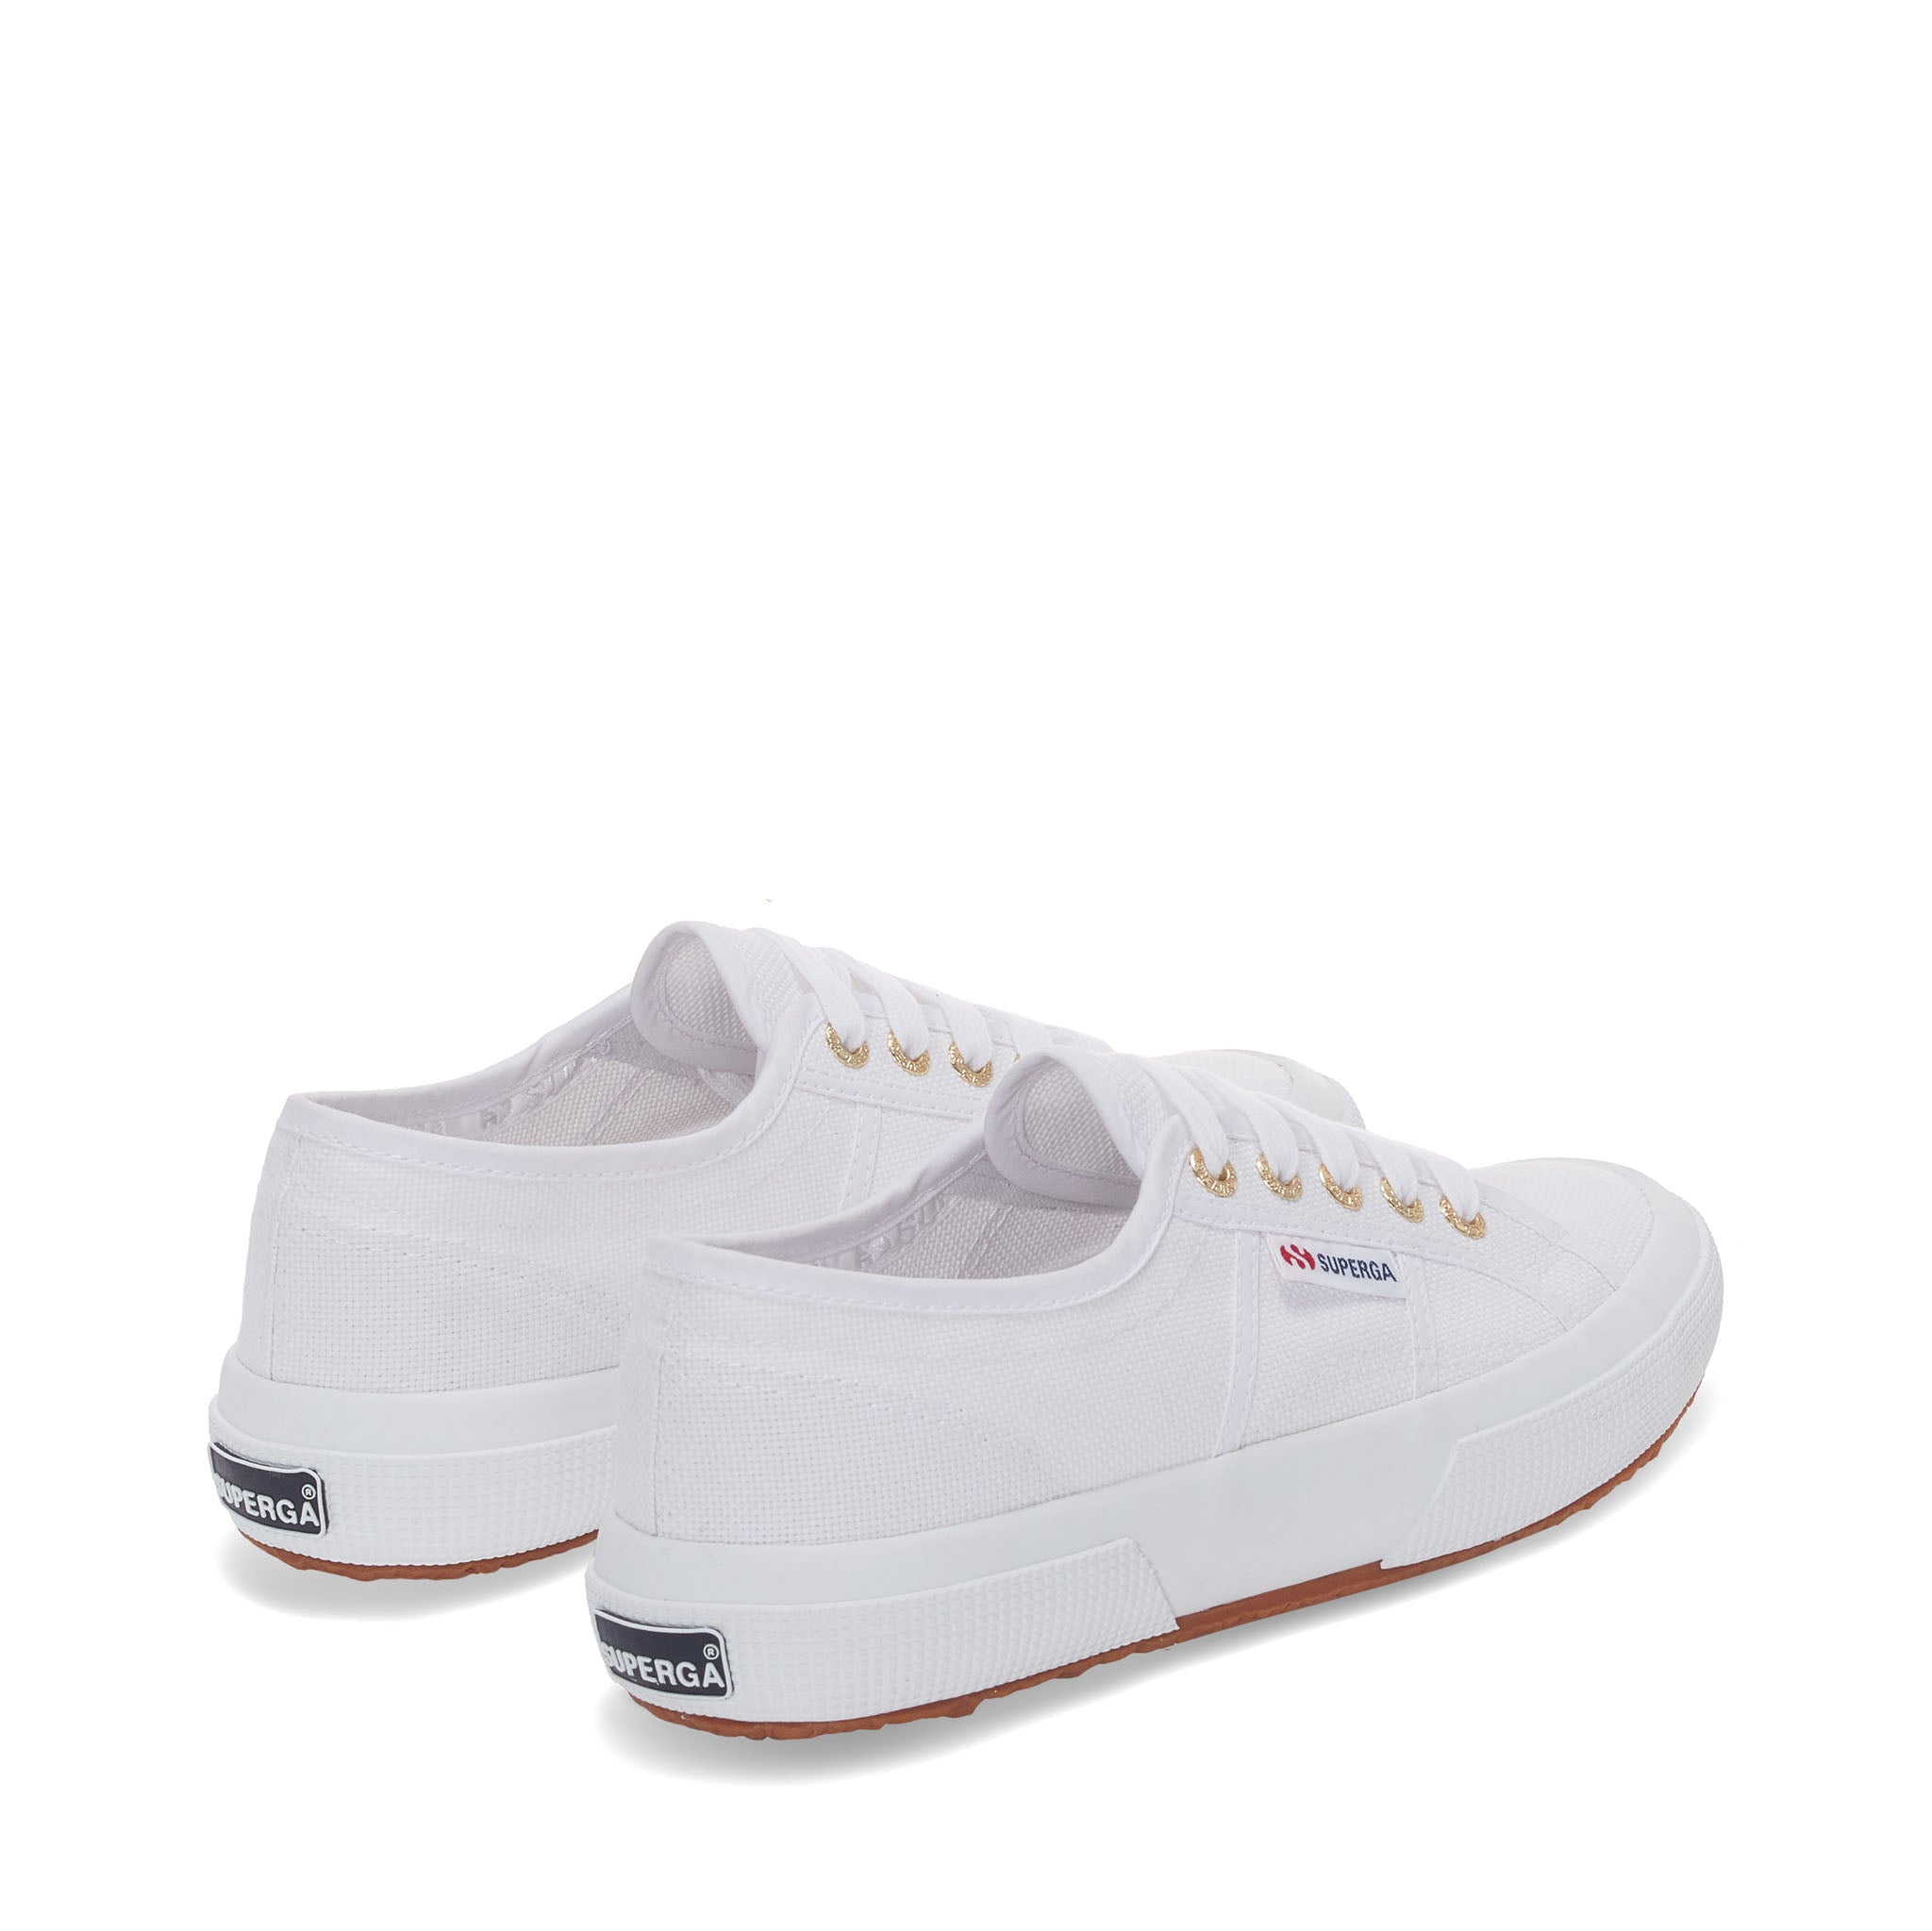 Superga 2750 Cotu Classic Sneakers - White Pale Gold. Back view.